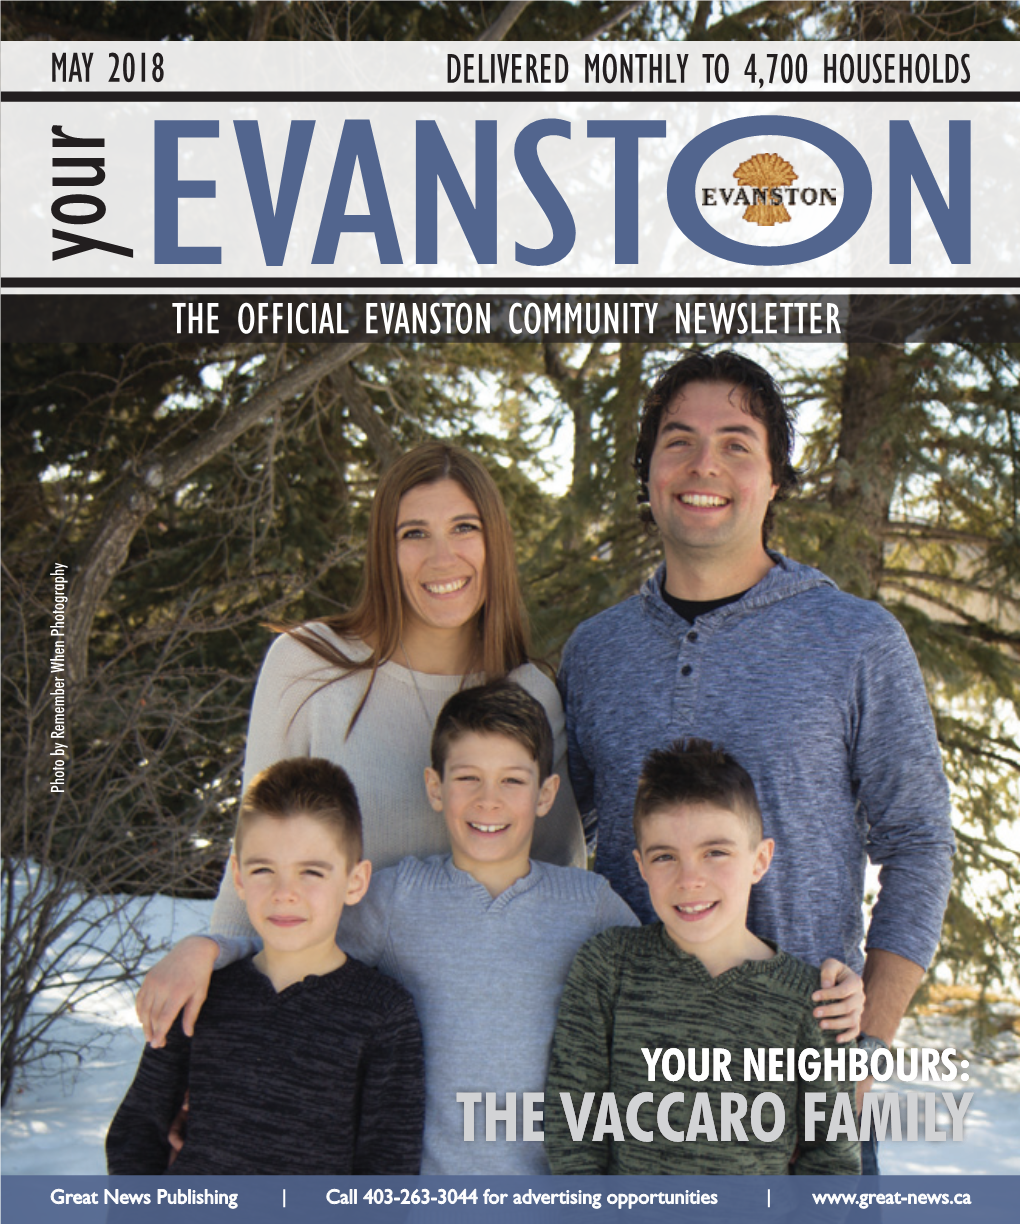 EVANSTON COMMUNITY NEWSLETTER Photo by Remember When Photography Photo by Remember